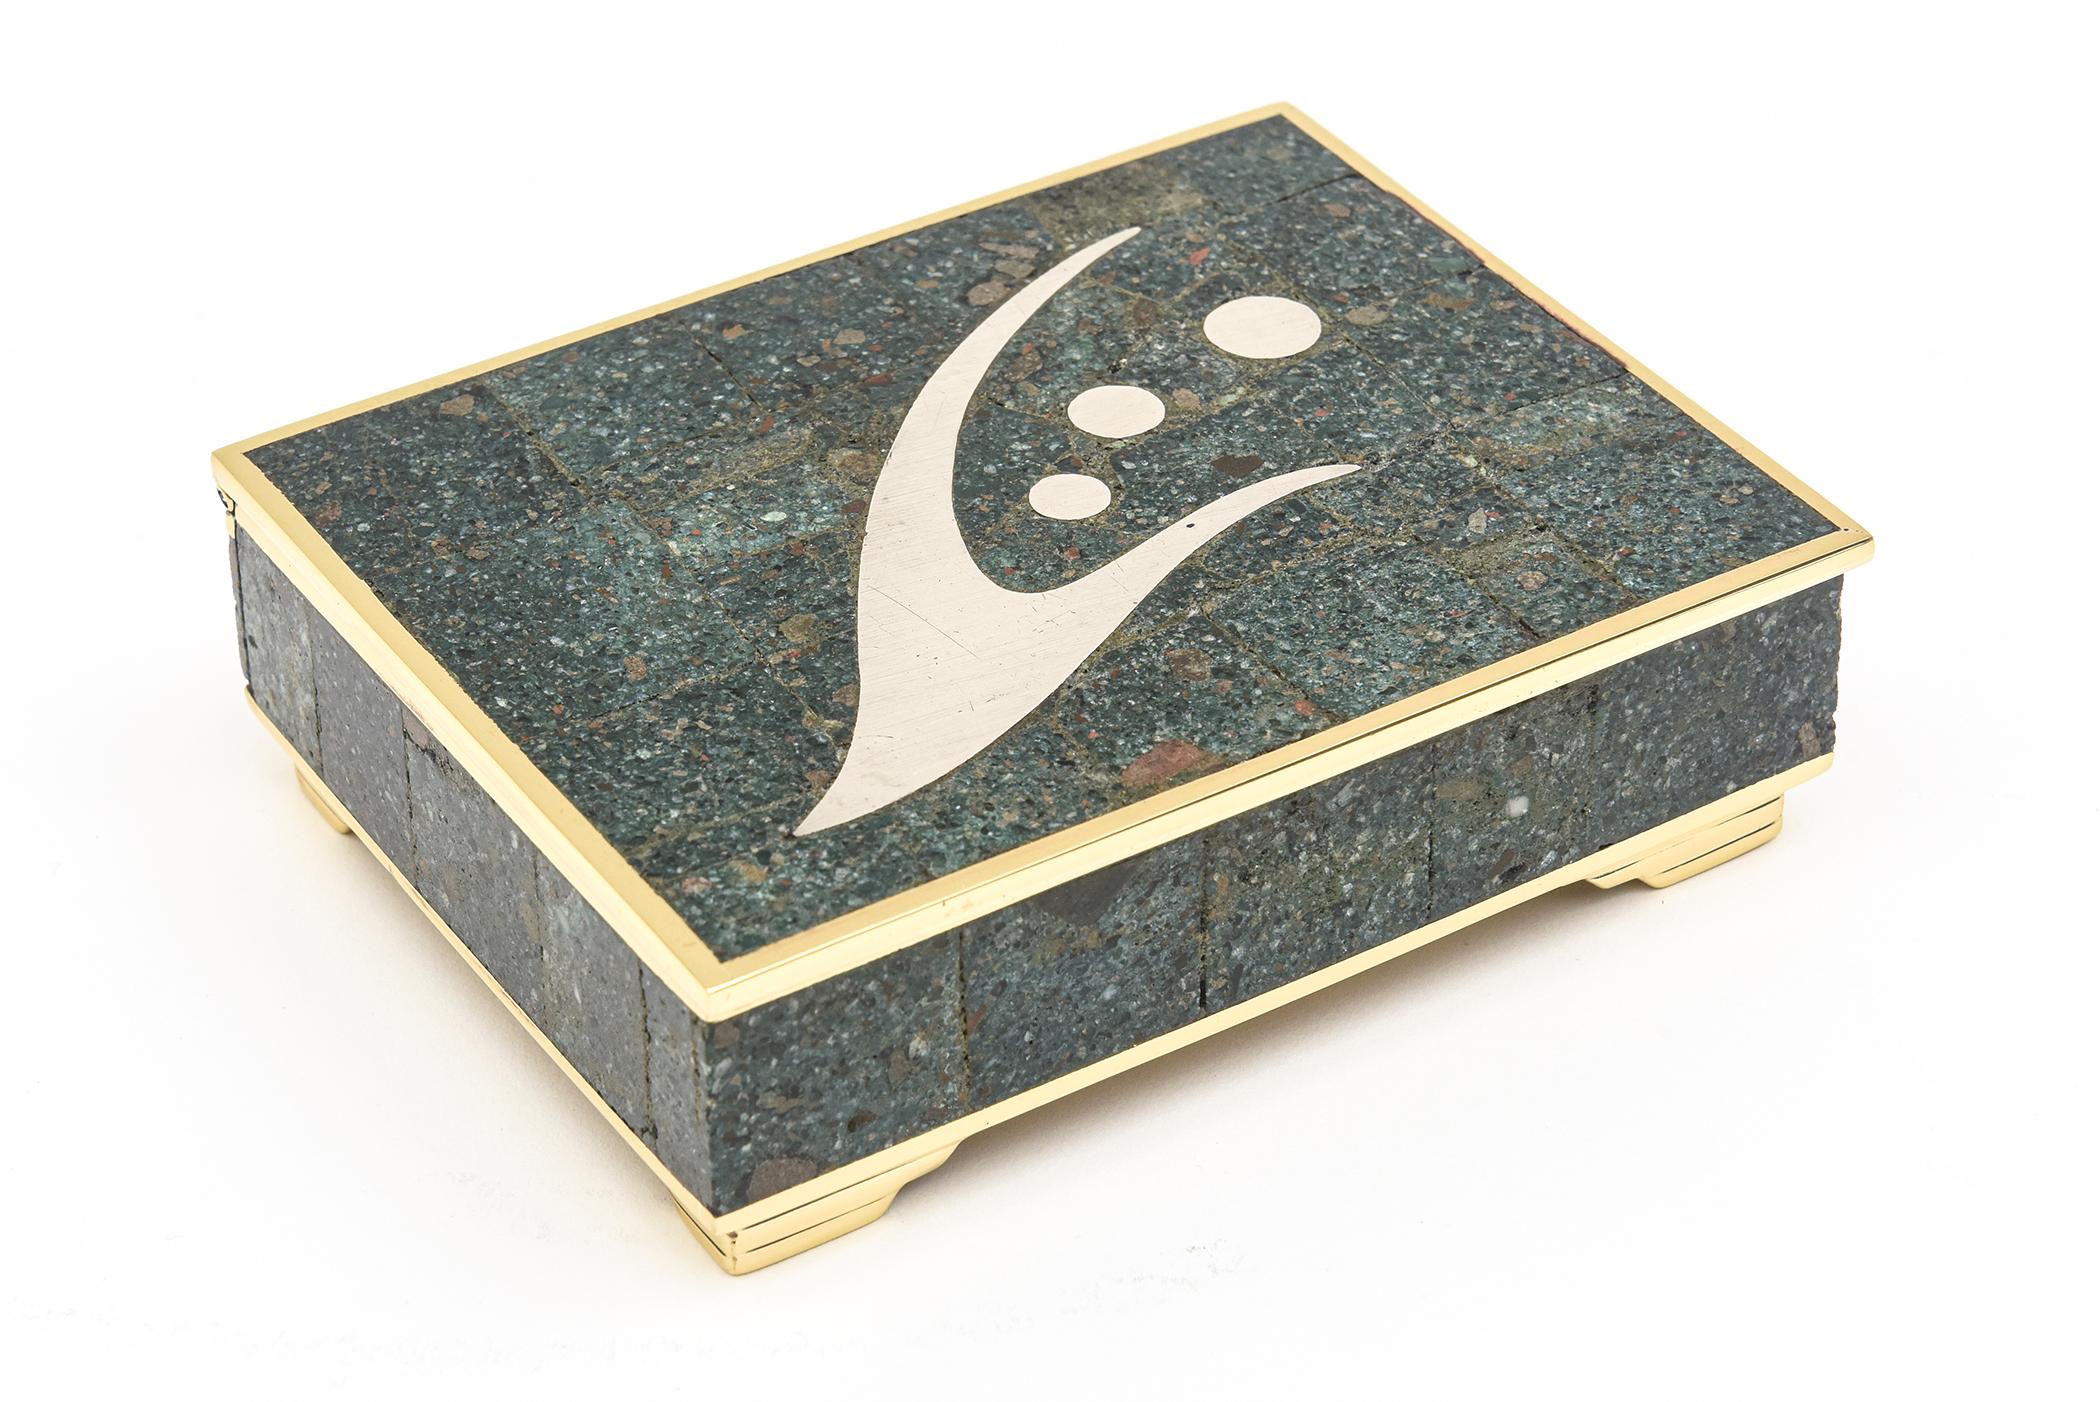 This unique abstract signed Mid-Century Modern mixed media hinged box is by Sigi Pineda and from Taxco Mexico in the 1950s. It is signed Sigi Taxco 8. The box is silver, brass, rosewood interior with the crushed turquoise, sodalite and other crushed